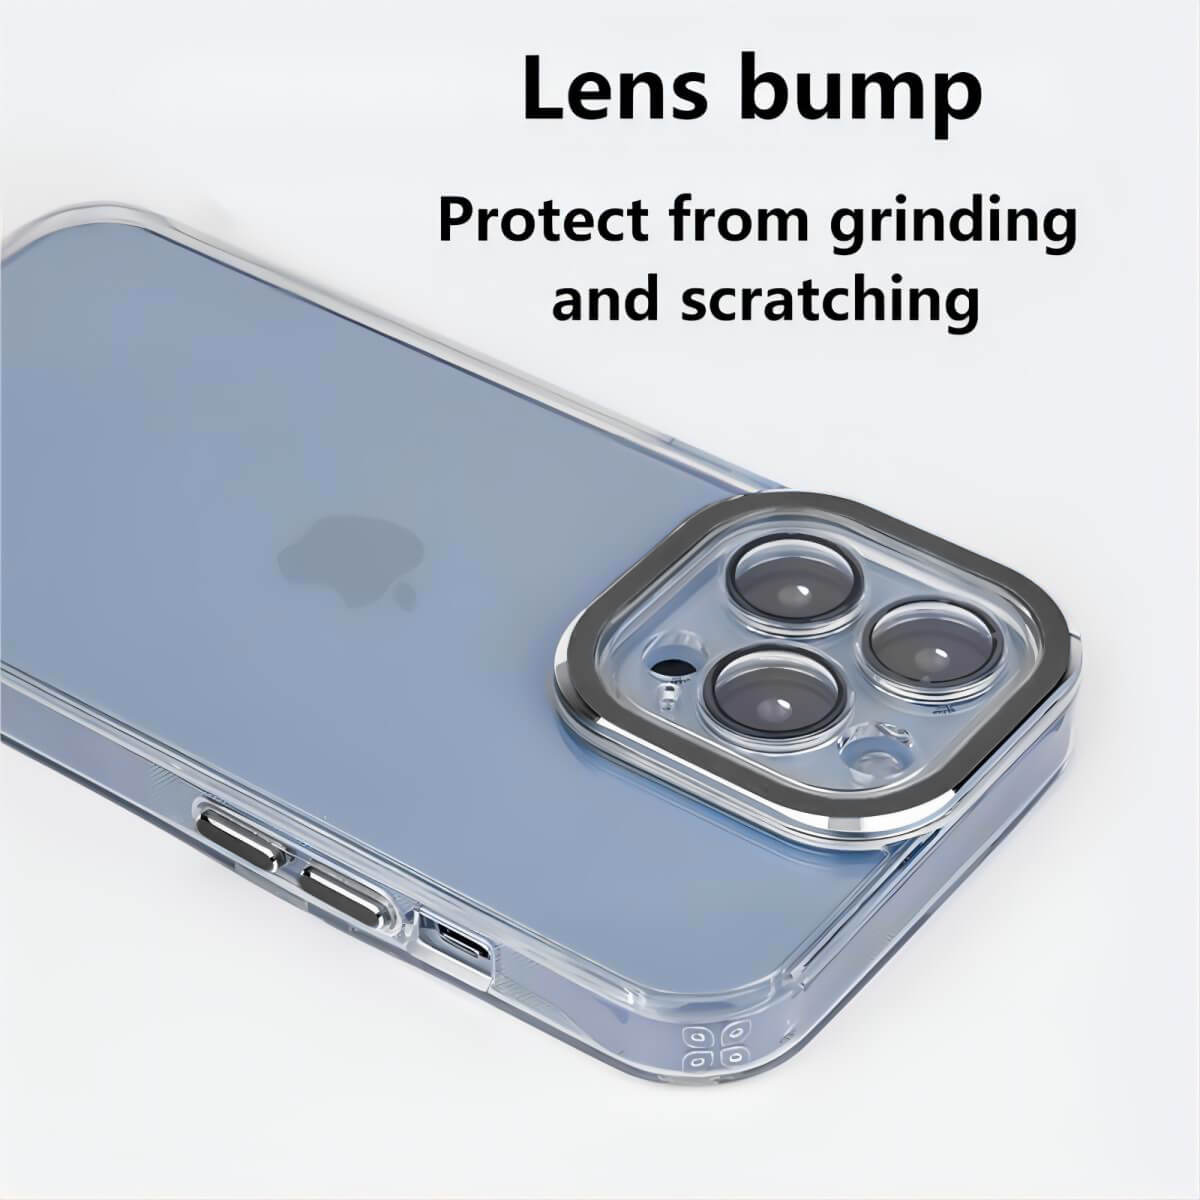 iPhone 11 Pro/11 Pro Max Clear Case Be Rugged-Hugmie